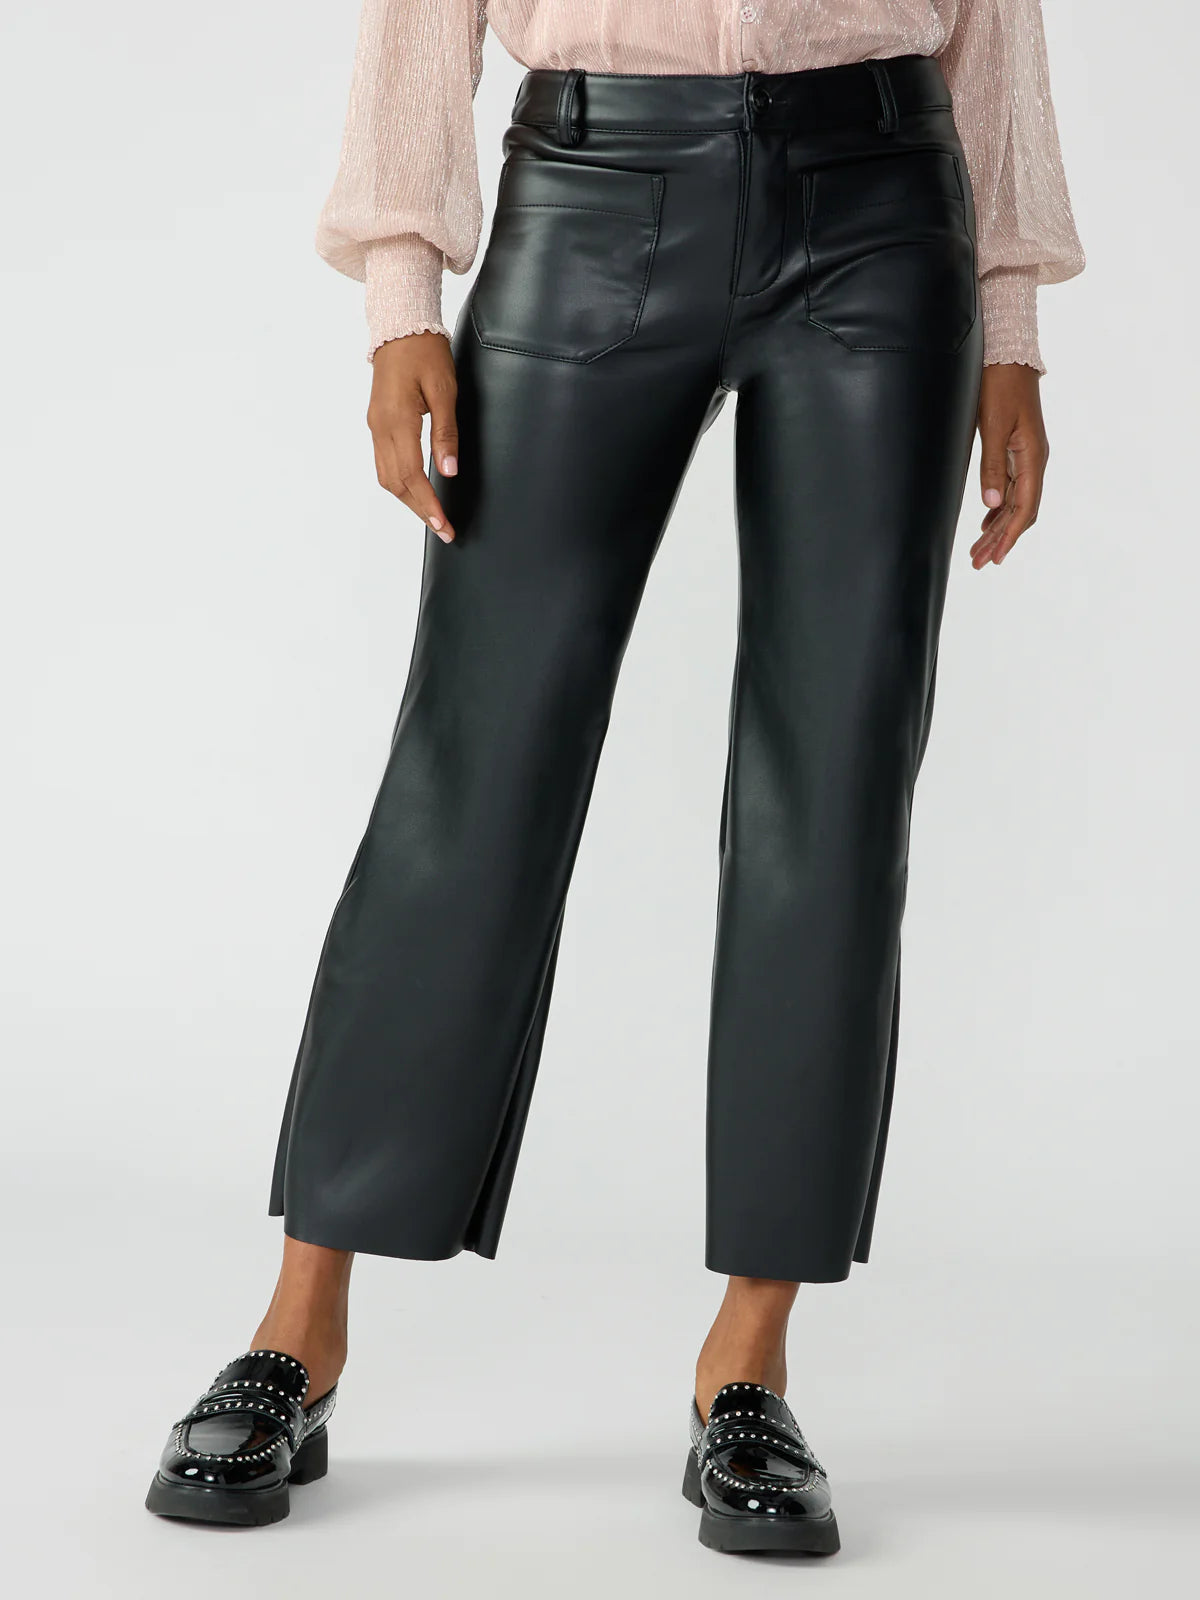 Black Marine Leather Cropped Trouser